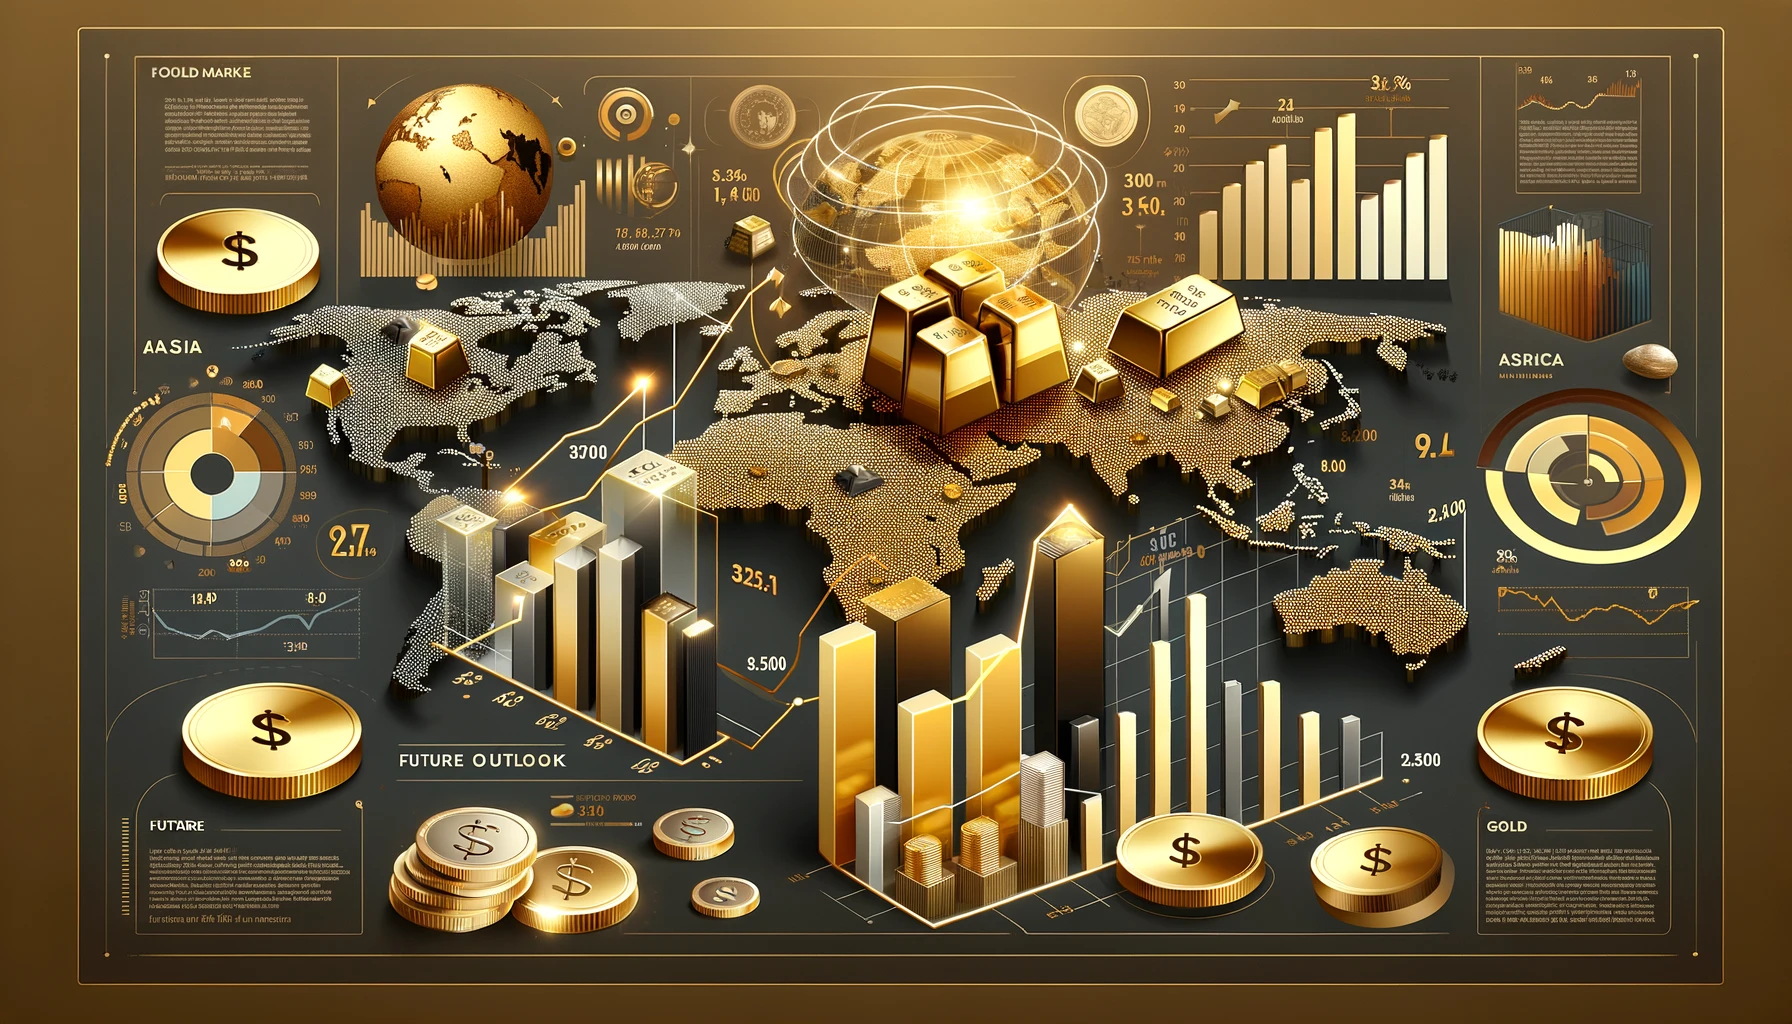 Growing Demand for Gold in Emerging Markets